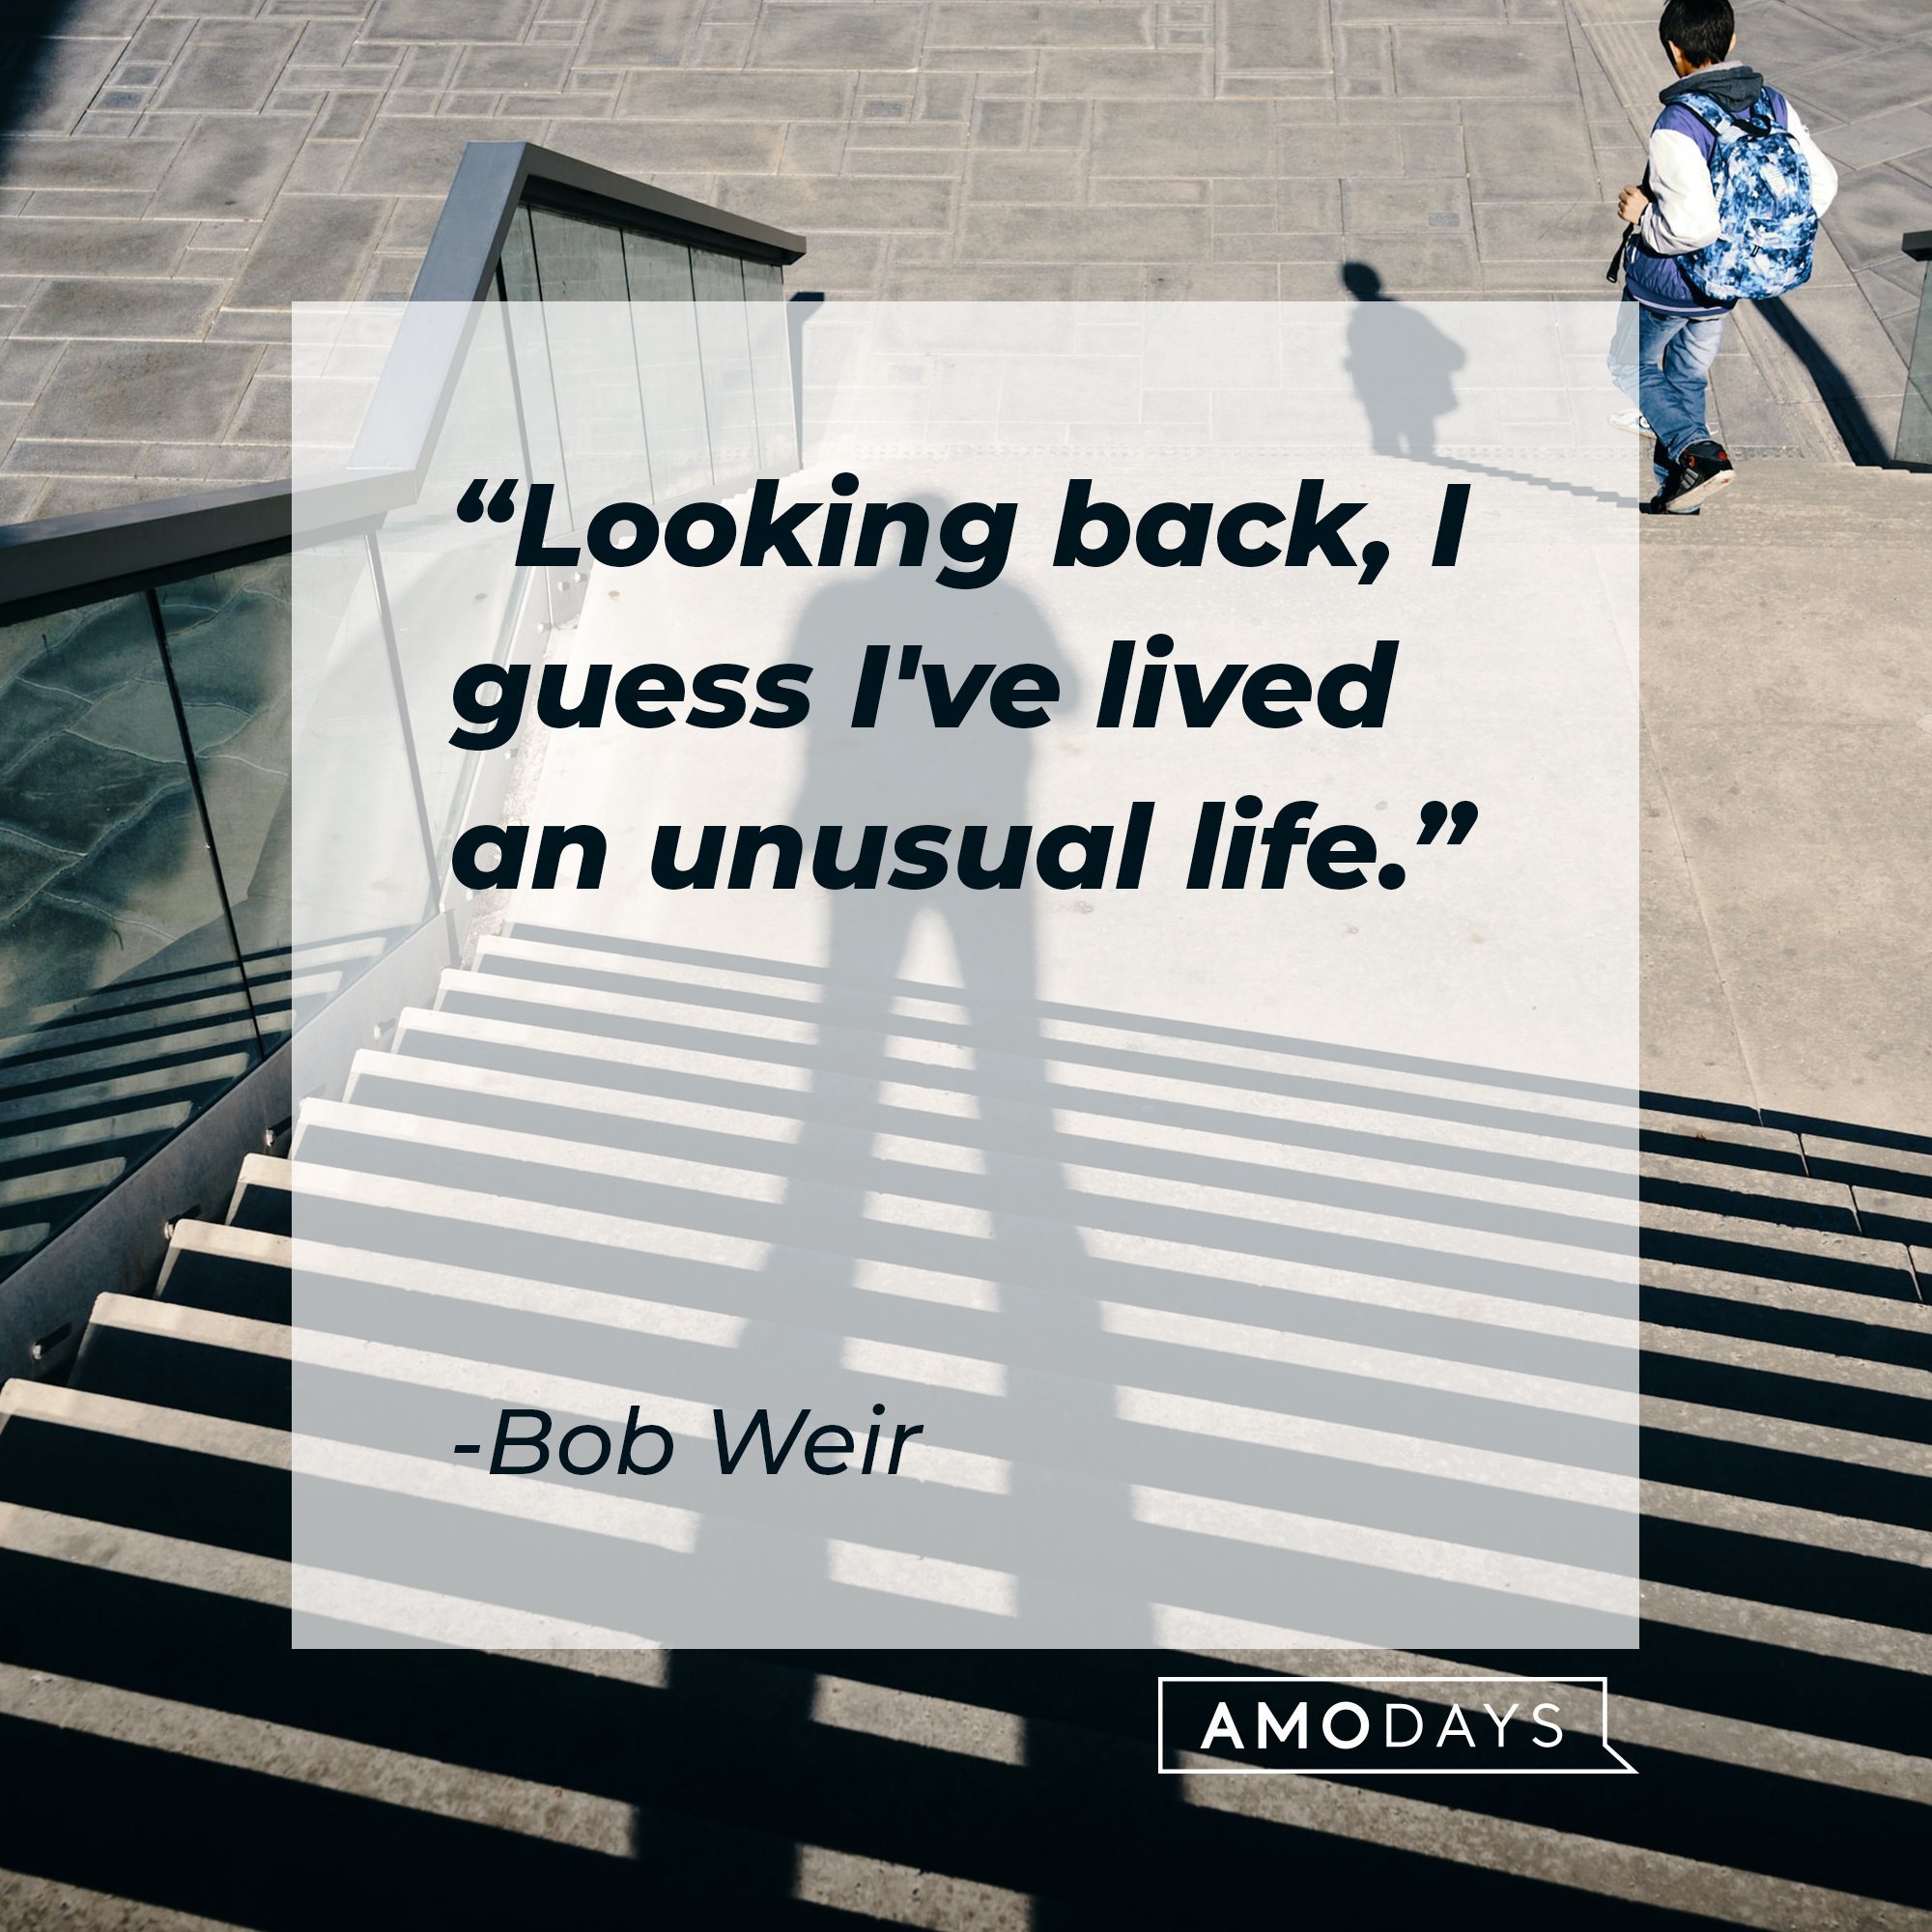 Bob Weir’s quote: "Looking back, I guess I've lived an unusual life." | Image: AmoDays 